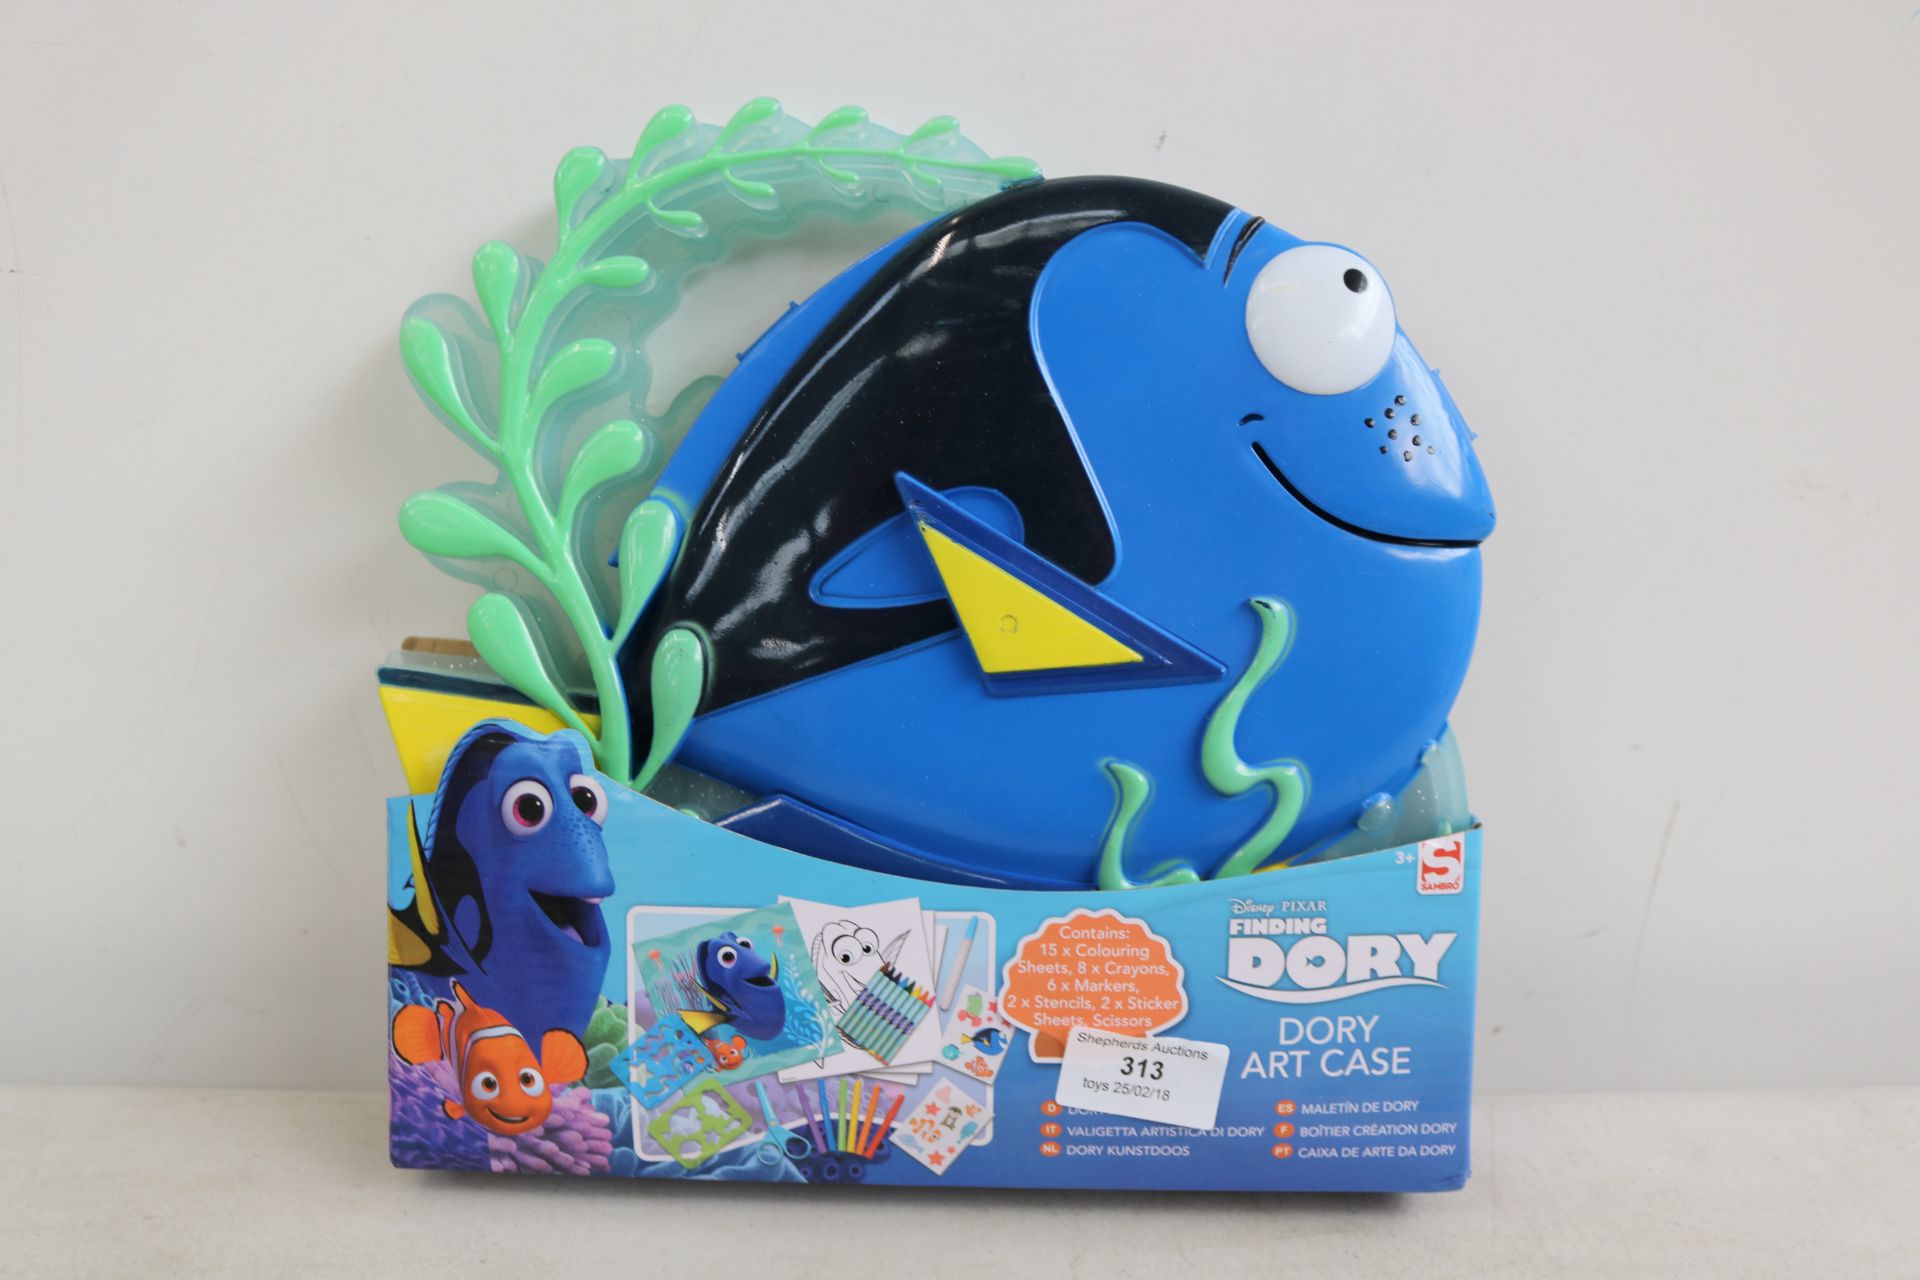 Disney Pixar Finding Dory Dory art case, new and packaged.